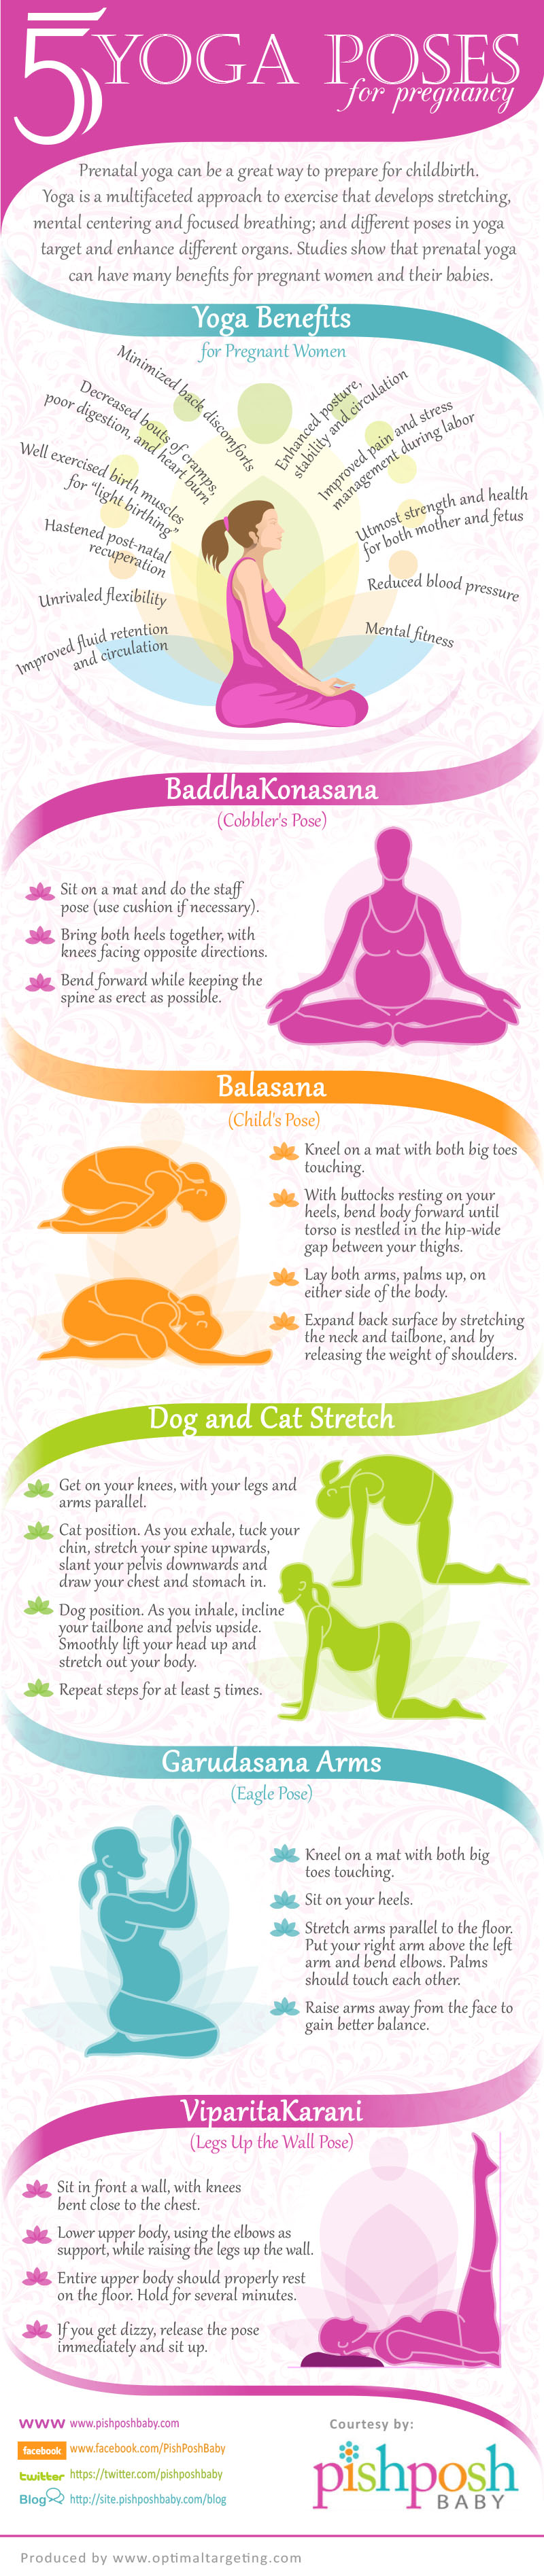 5 Yoga Poses For Pregnant Women Infographic